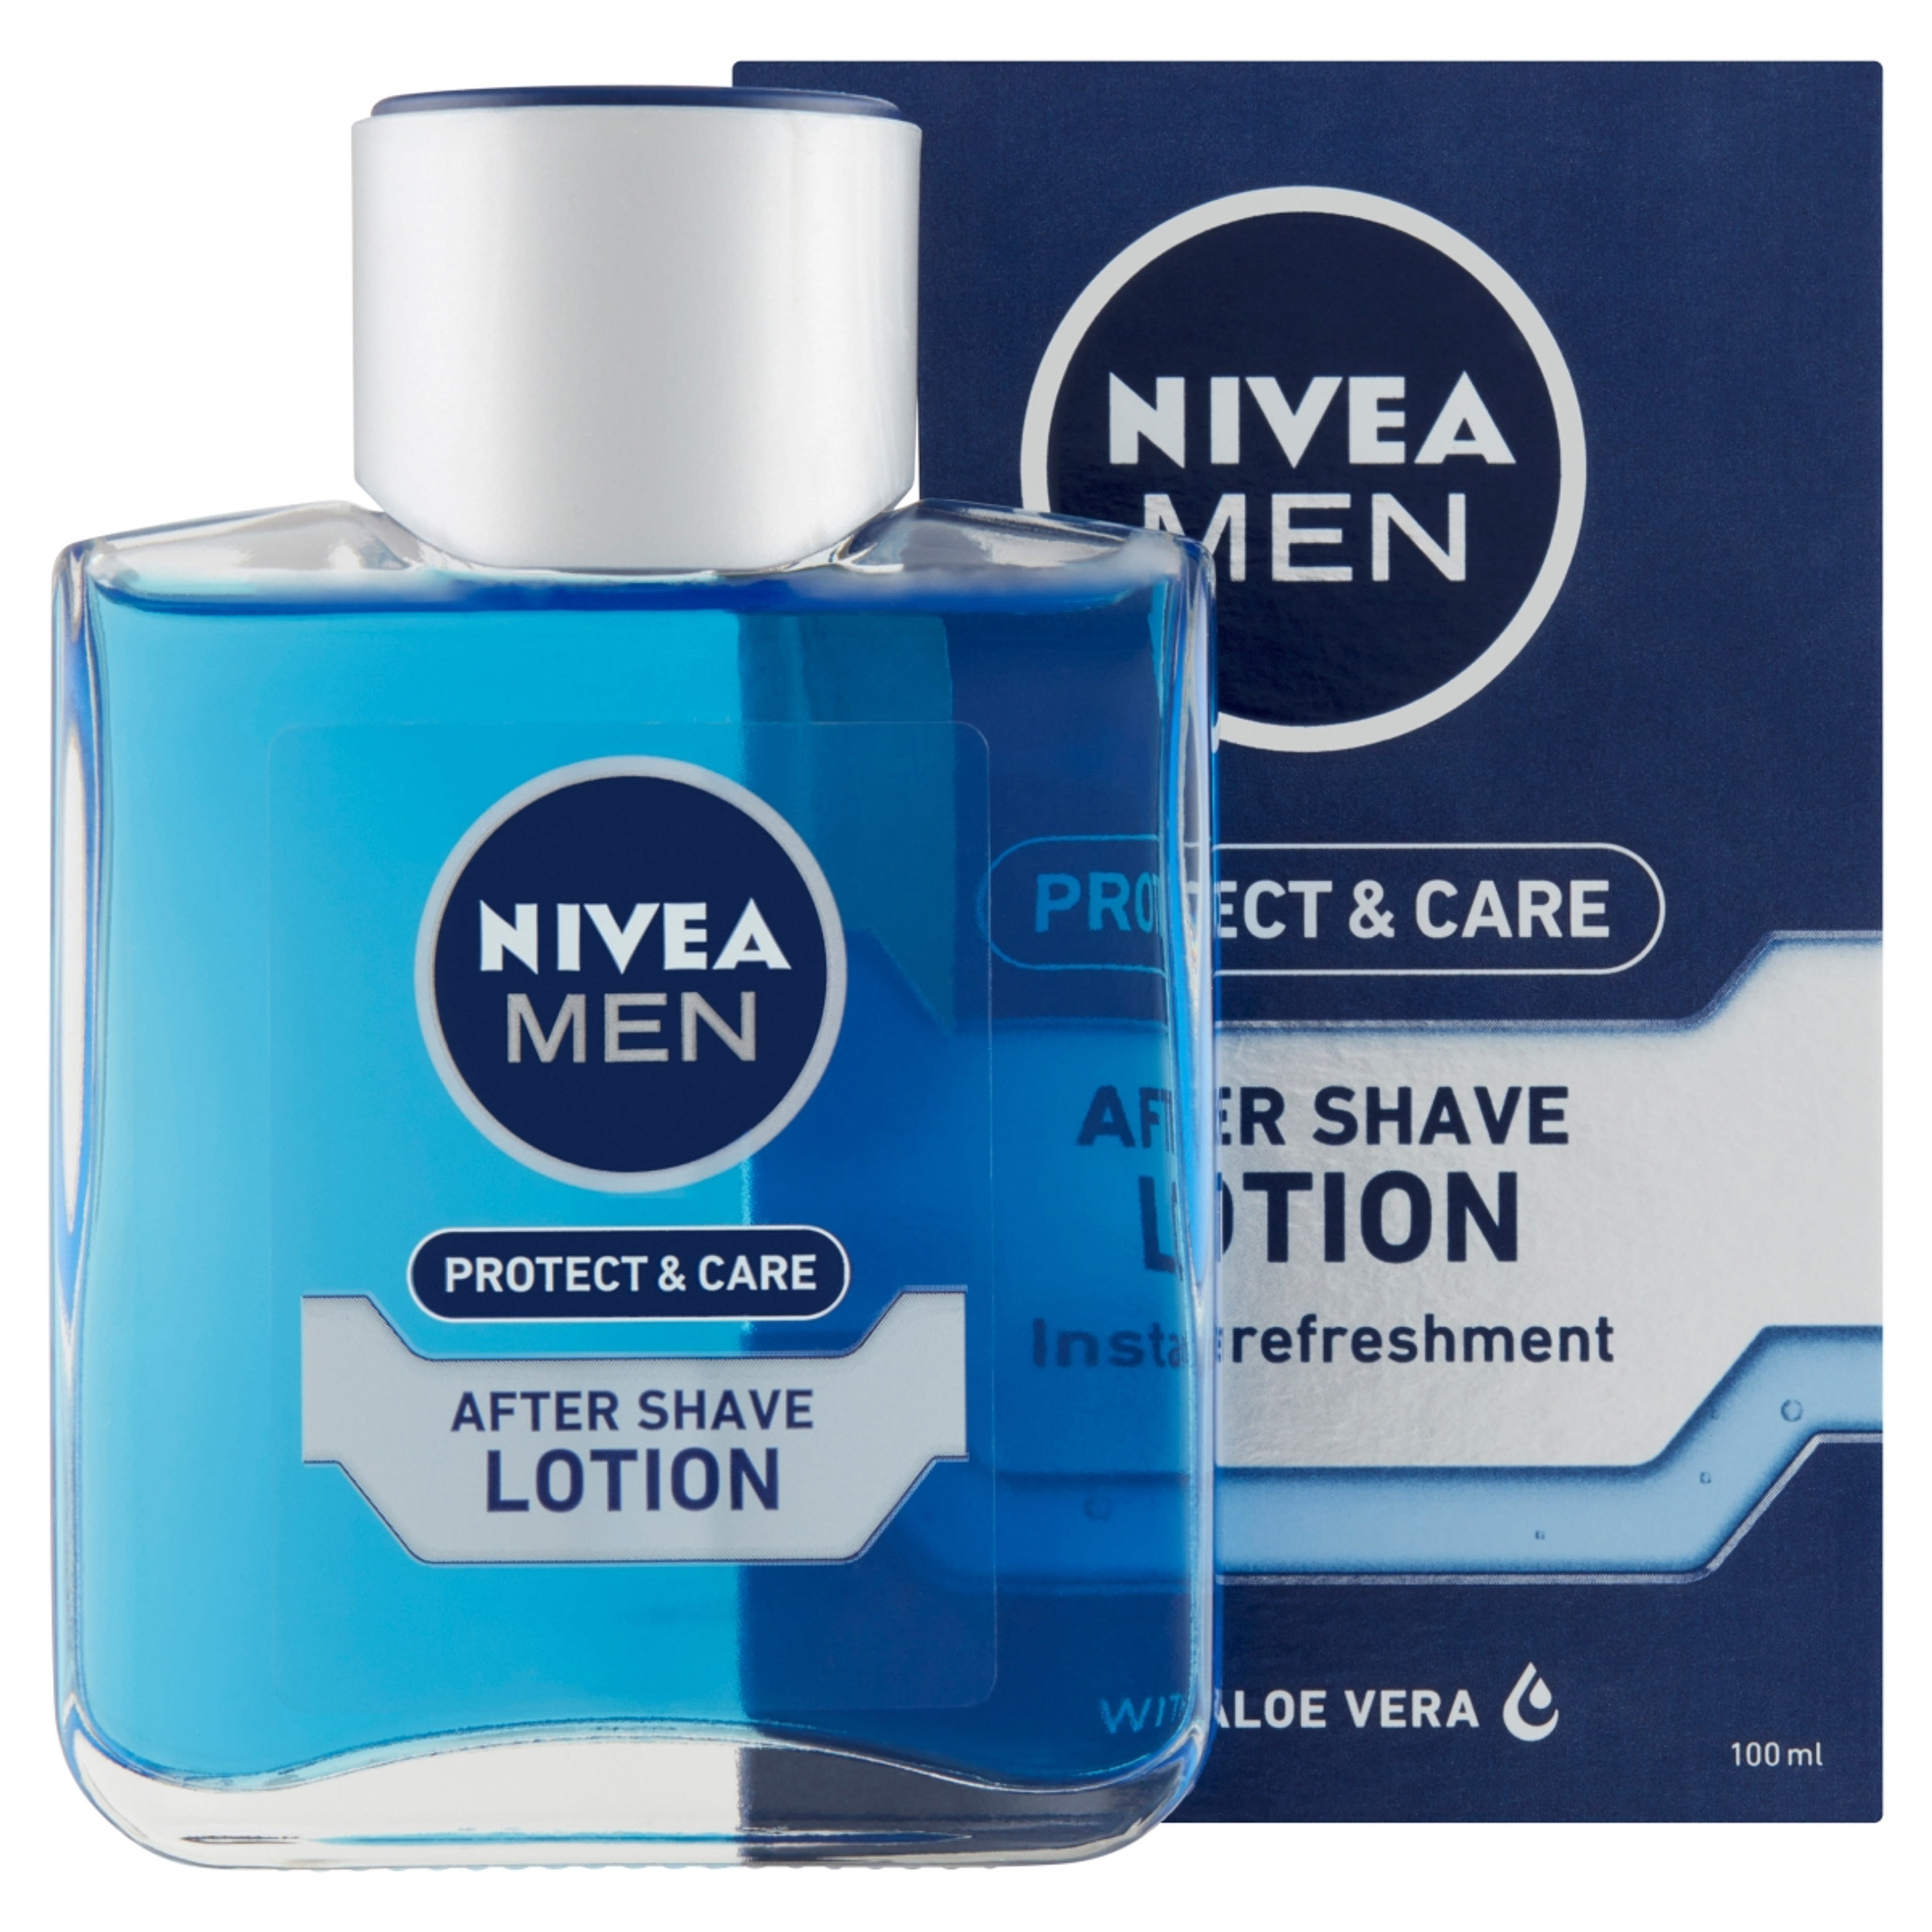 Nivea Men Protect & Care After Shave Lotion - 100 ml-2